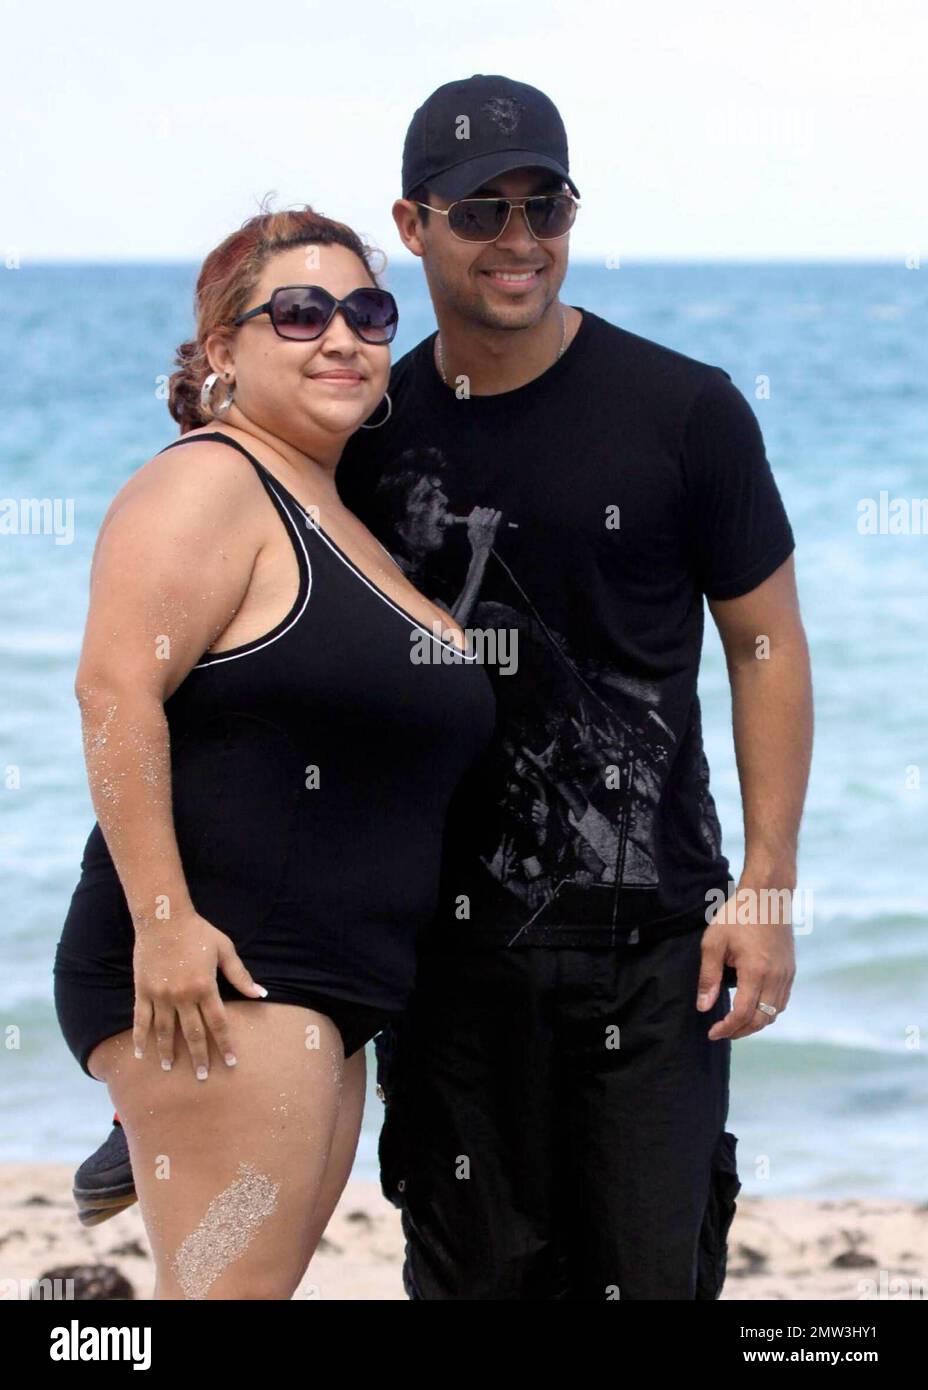 EXCLUSIVE!! American actor Wilmer Valderrama, best known for the role of Fez in the sitcom "That '70s Show," shows off his beach body as he cools off in the Atlantic Ocean with friends during a visit to Miami Beach, FL. 8/23/09. Stock Photo